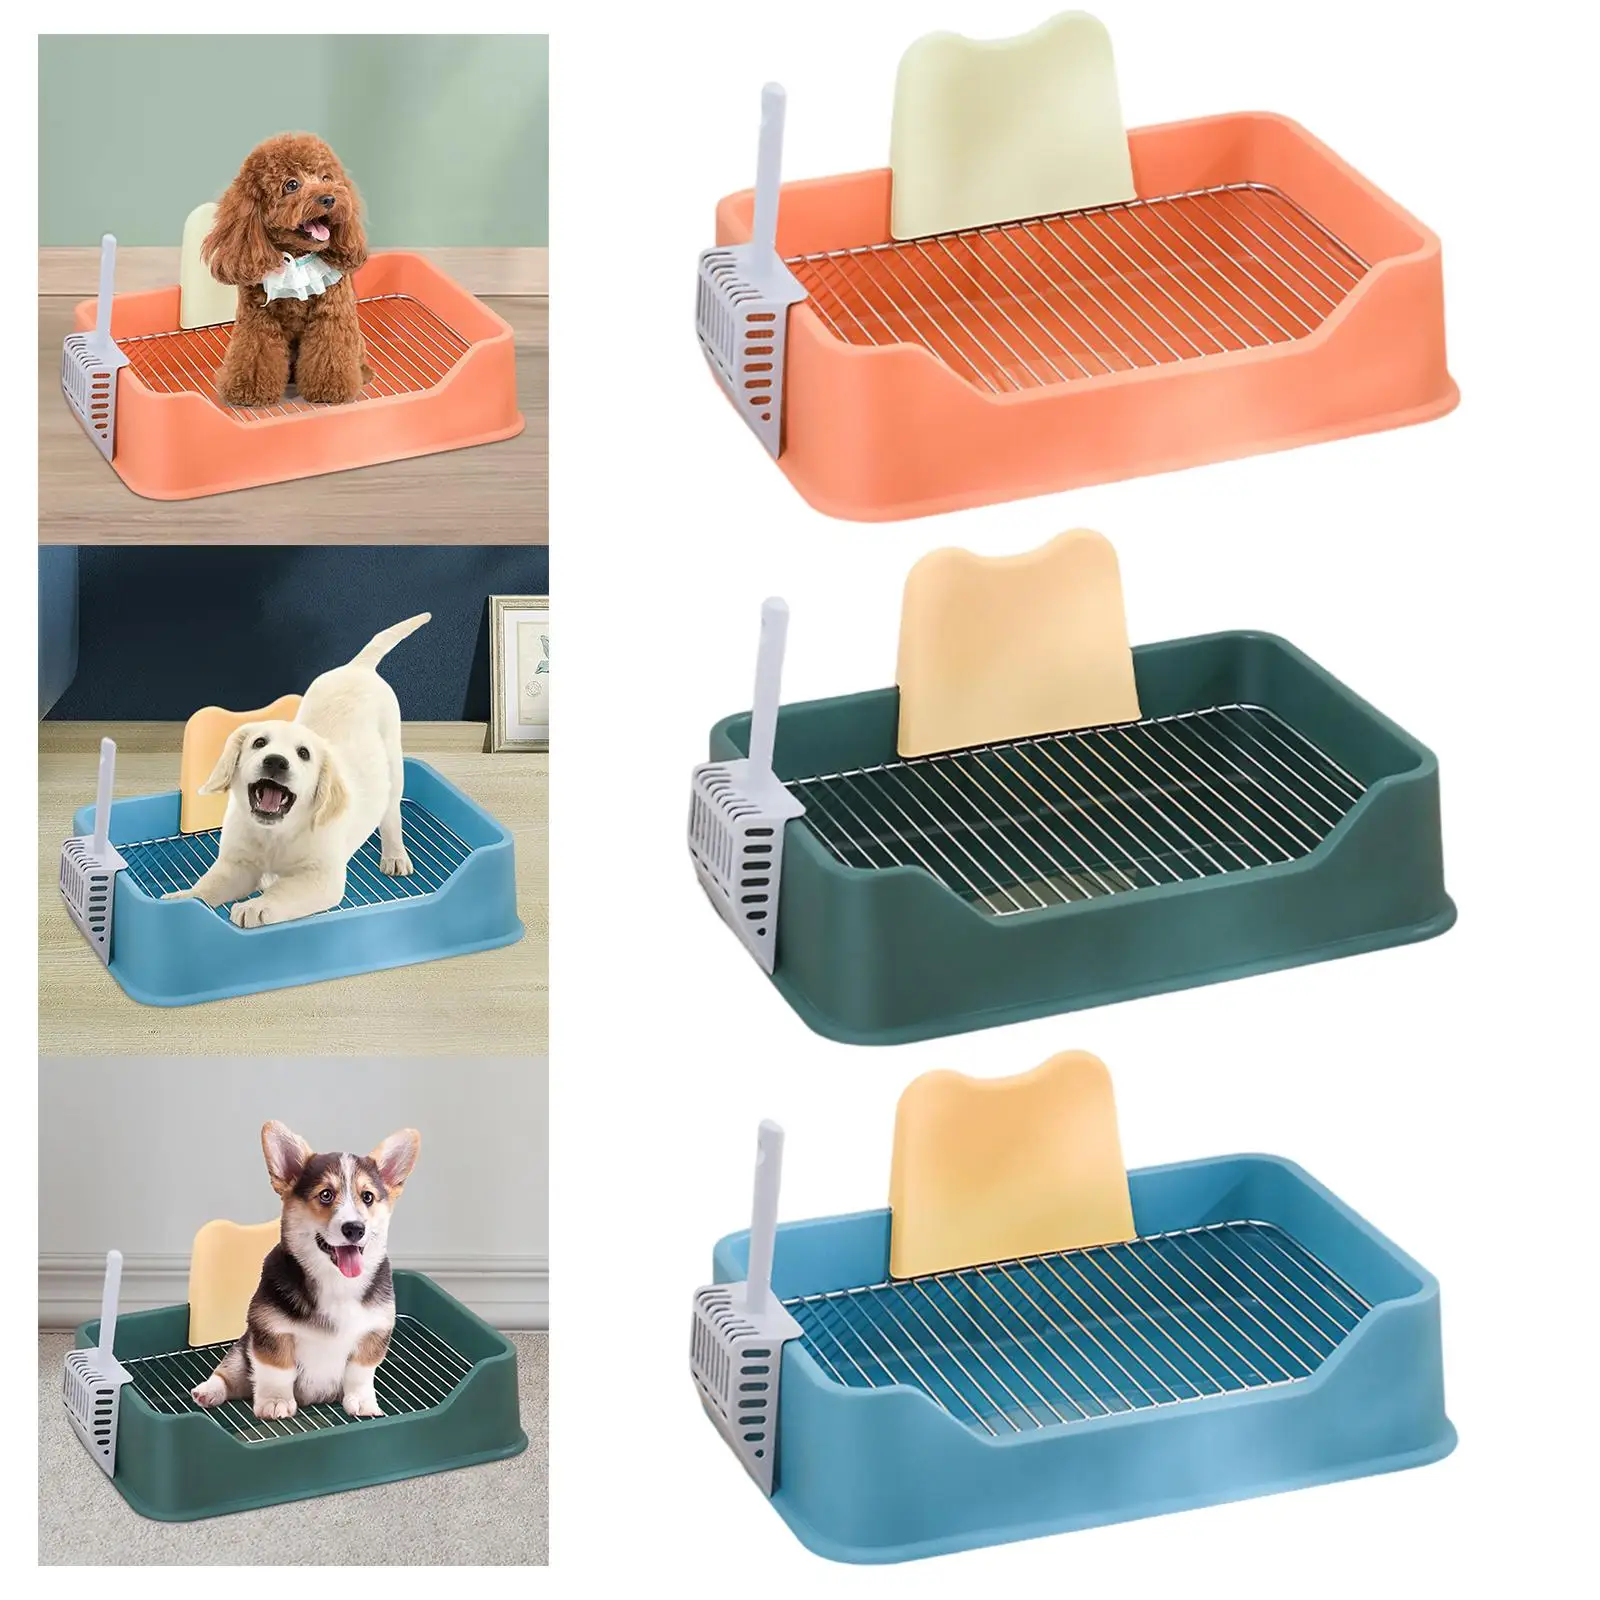 Pet Dog Toilet Litter Tray Puppy Potty Tray Pet Supplies Easy to Clean Tool for Small Dogs Pet Pee Toilet Indoor Dog Potty Tray